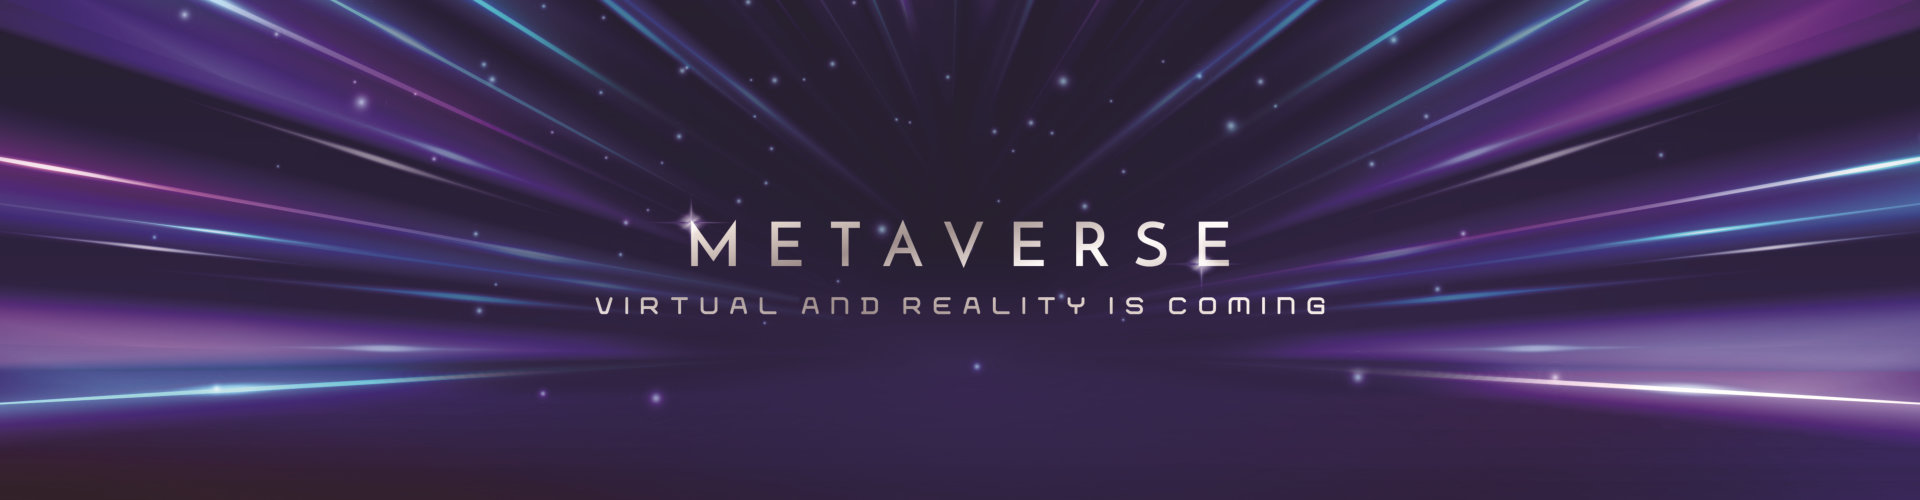 A purple background with the word metaverse in front of it.